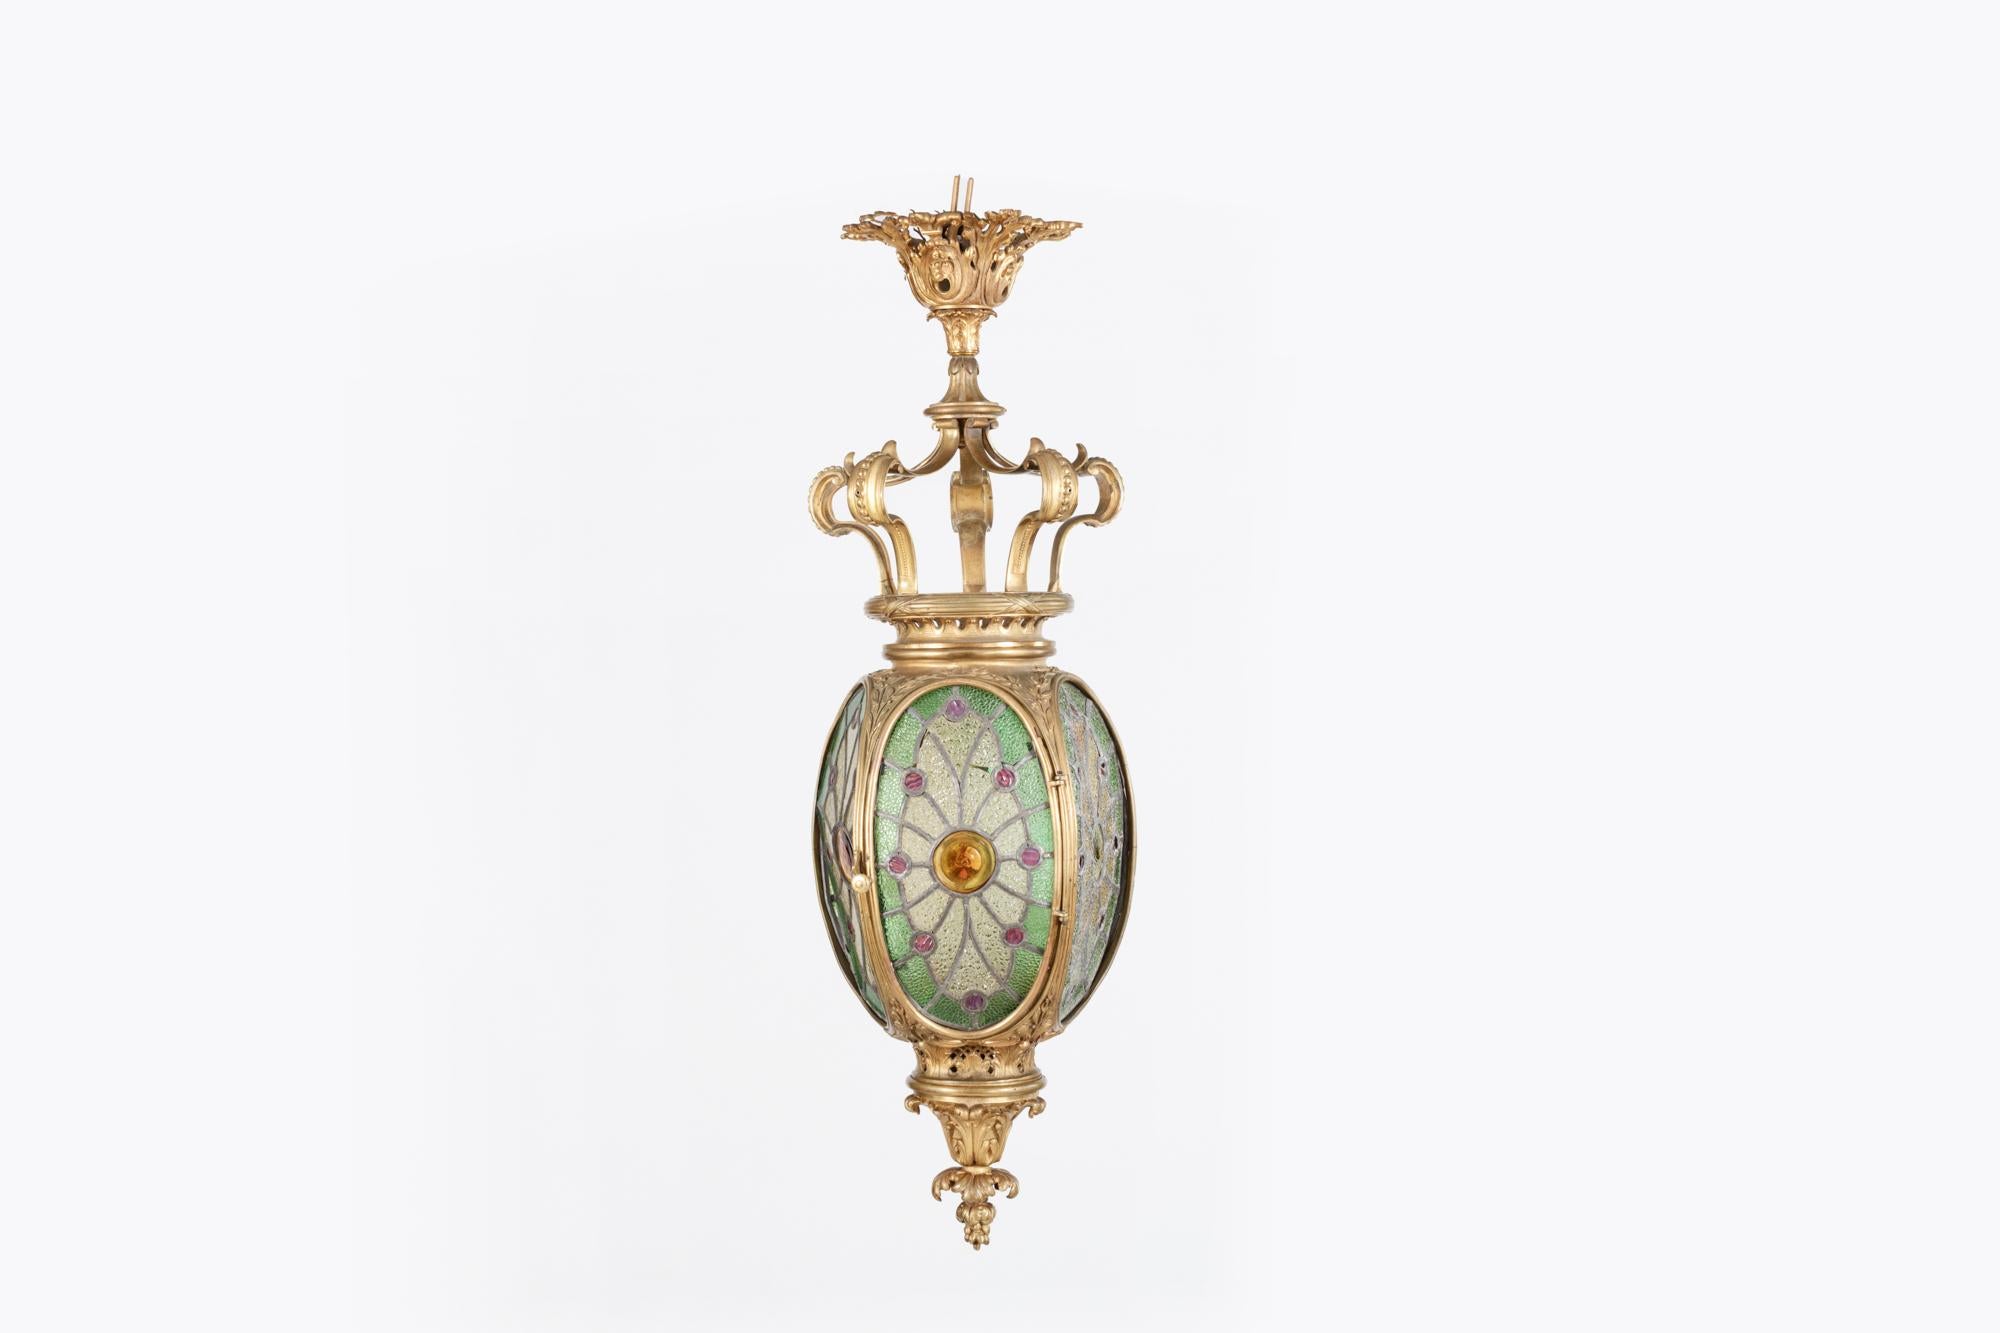 19th Century heavily decorated four-sided brass hall lantern with original stained glass panels.